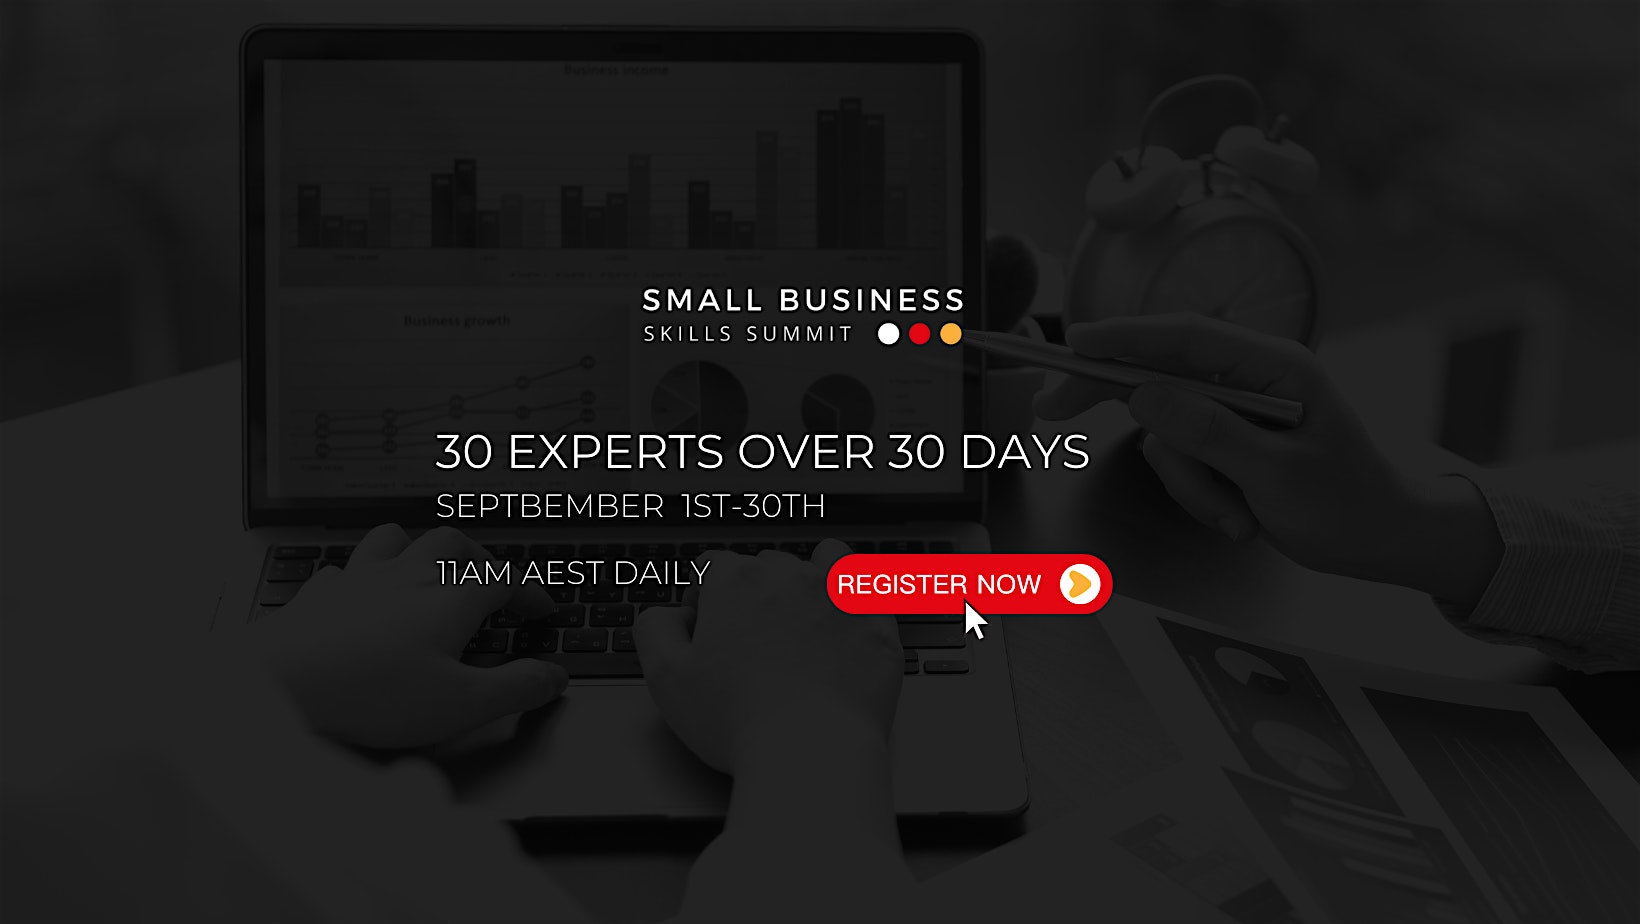 2022 Small Business Skills Summit – 30 Experts over 30 days